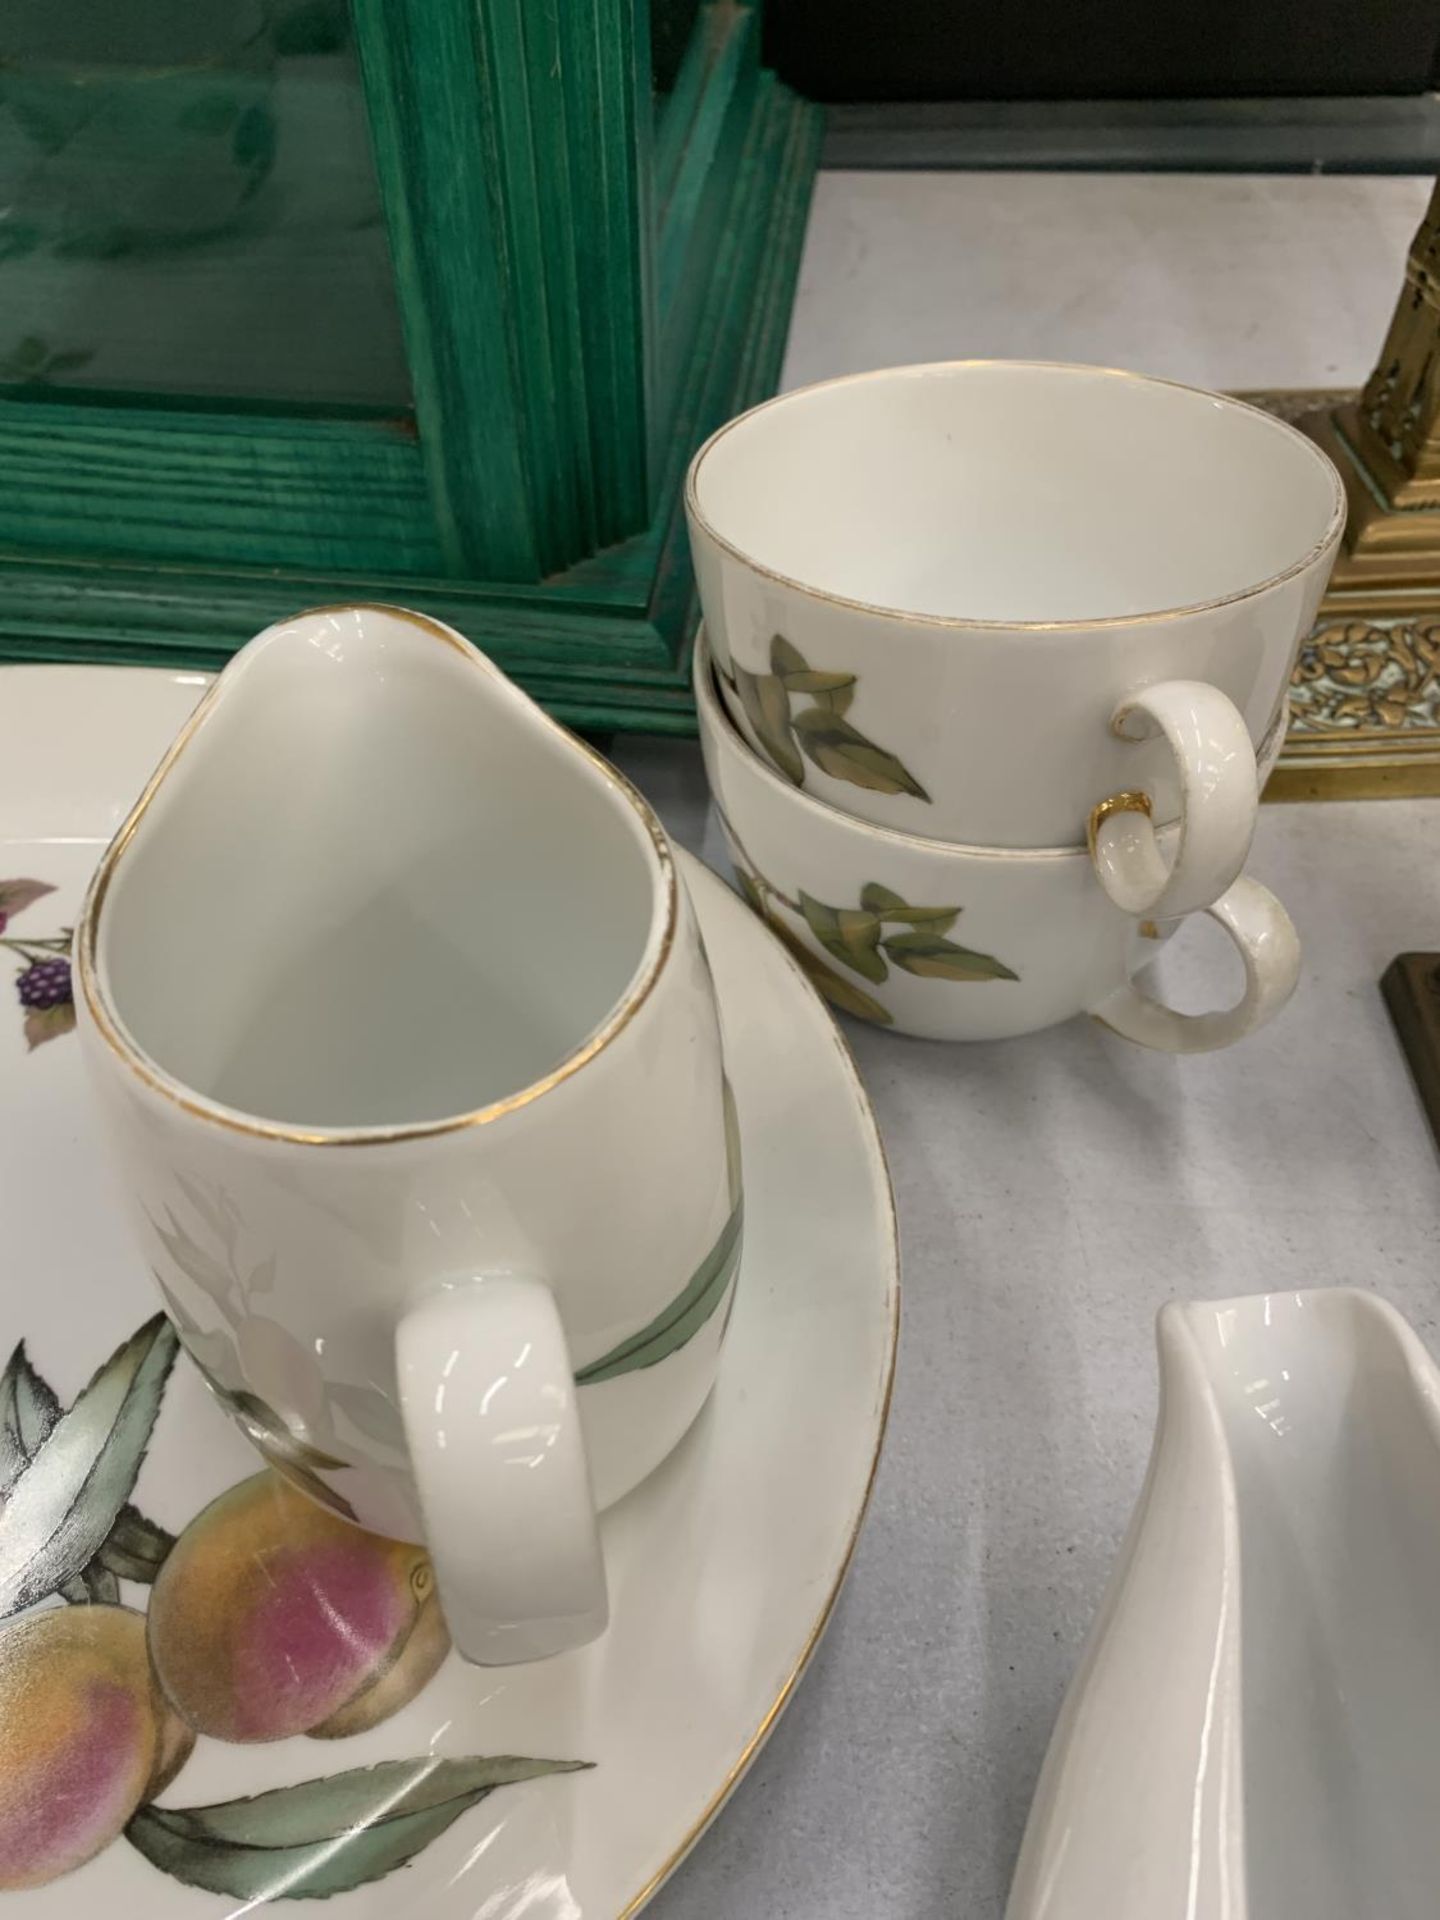 A QUANTITY OF ROYAL WORCESTER 'EVESHAM' TABLE WARE TO INCLUDE A SERVING PLATE, RAMEKINS, CUPS, A - Image 4 of 5